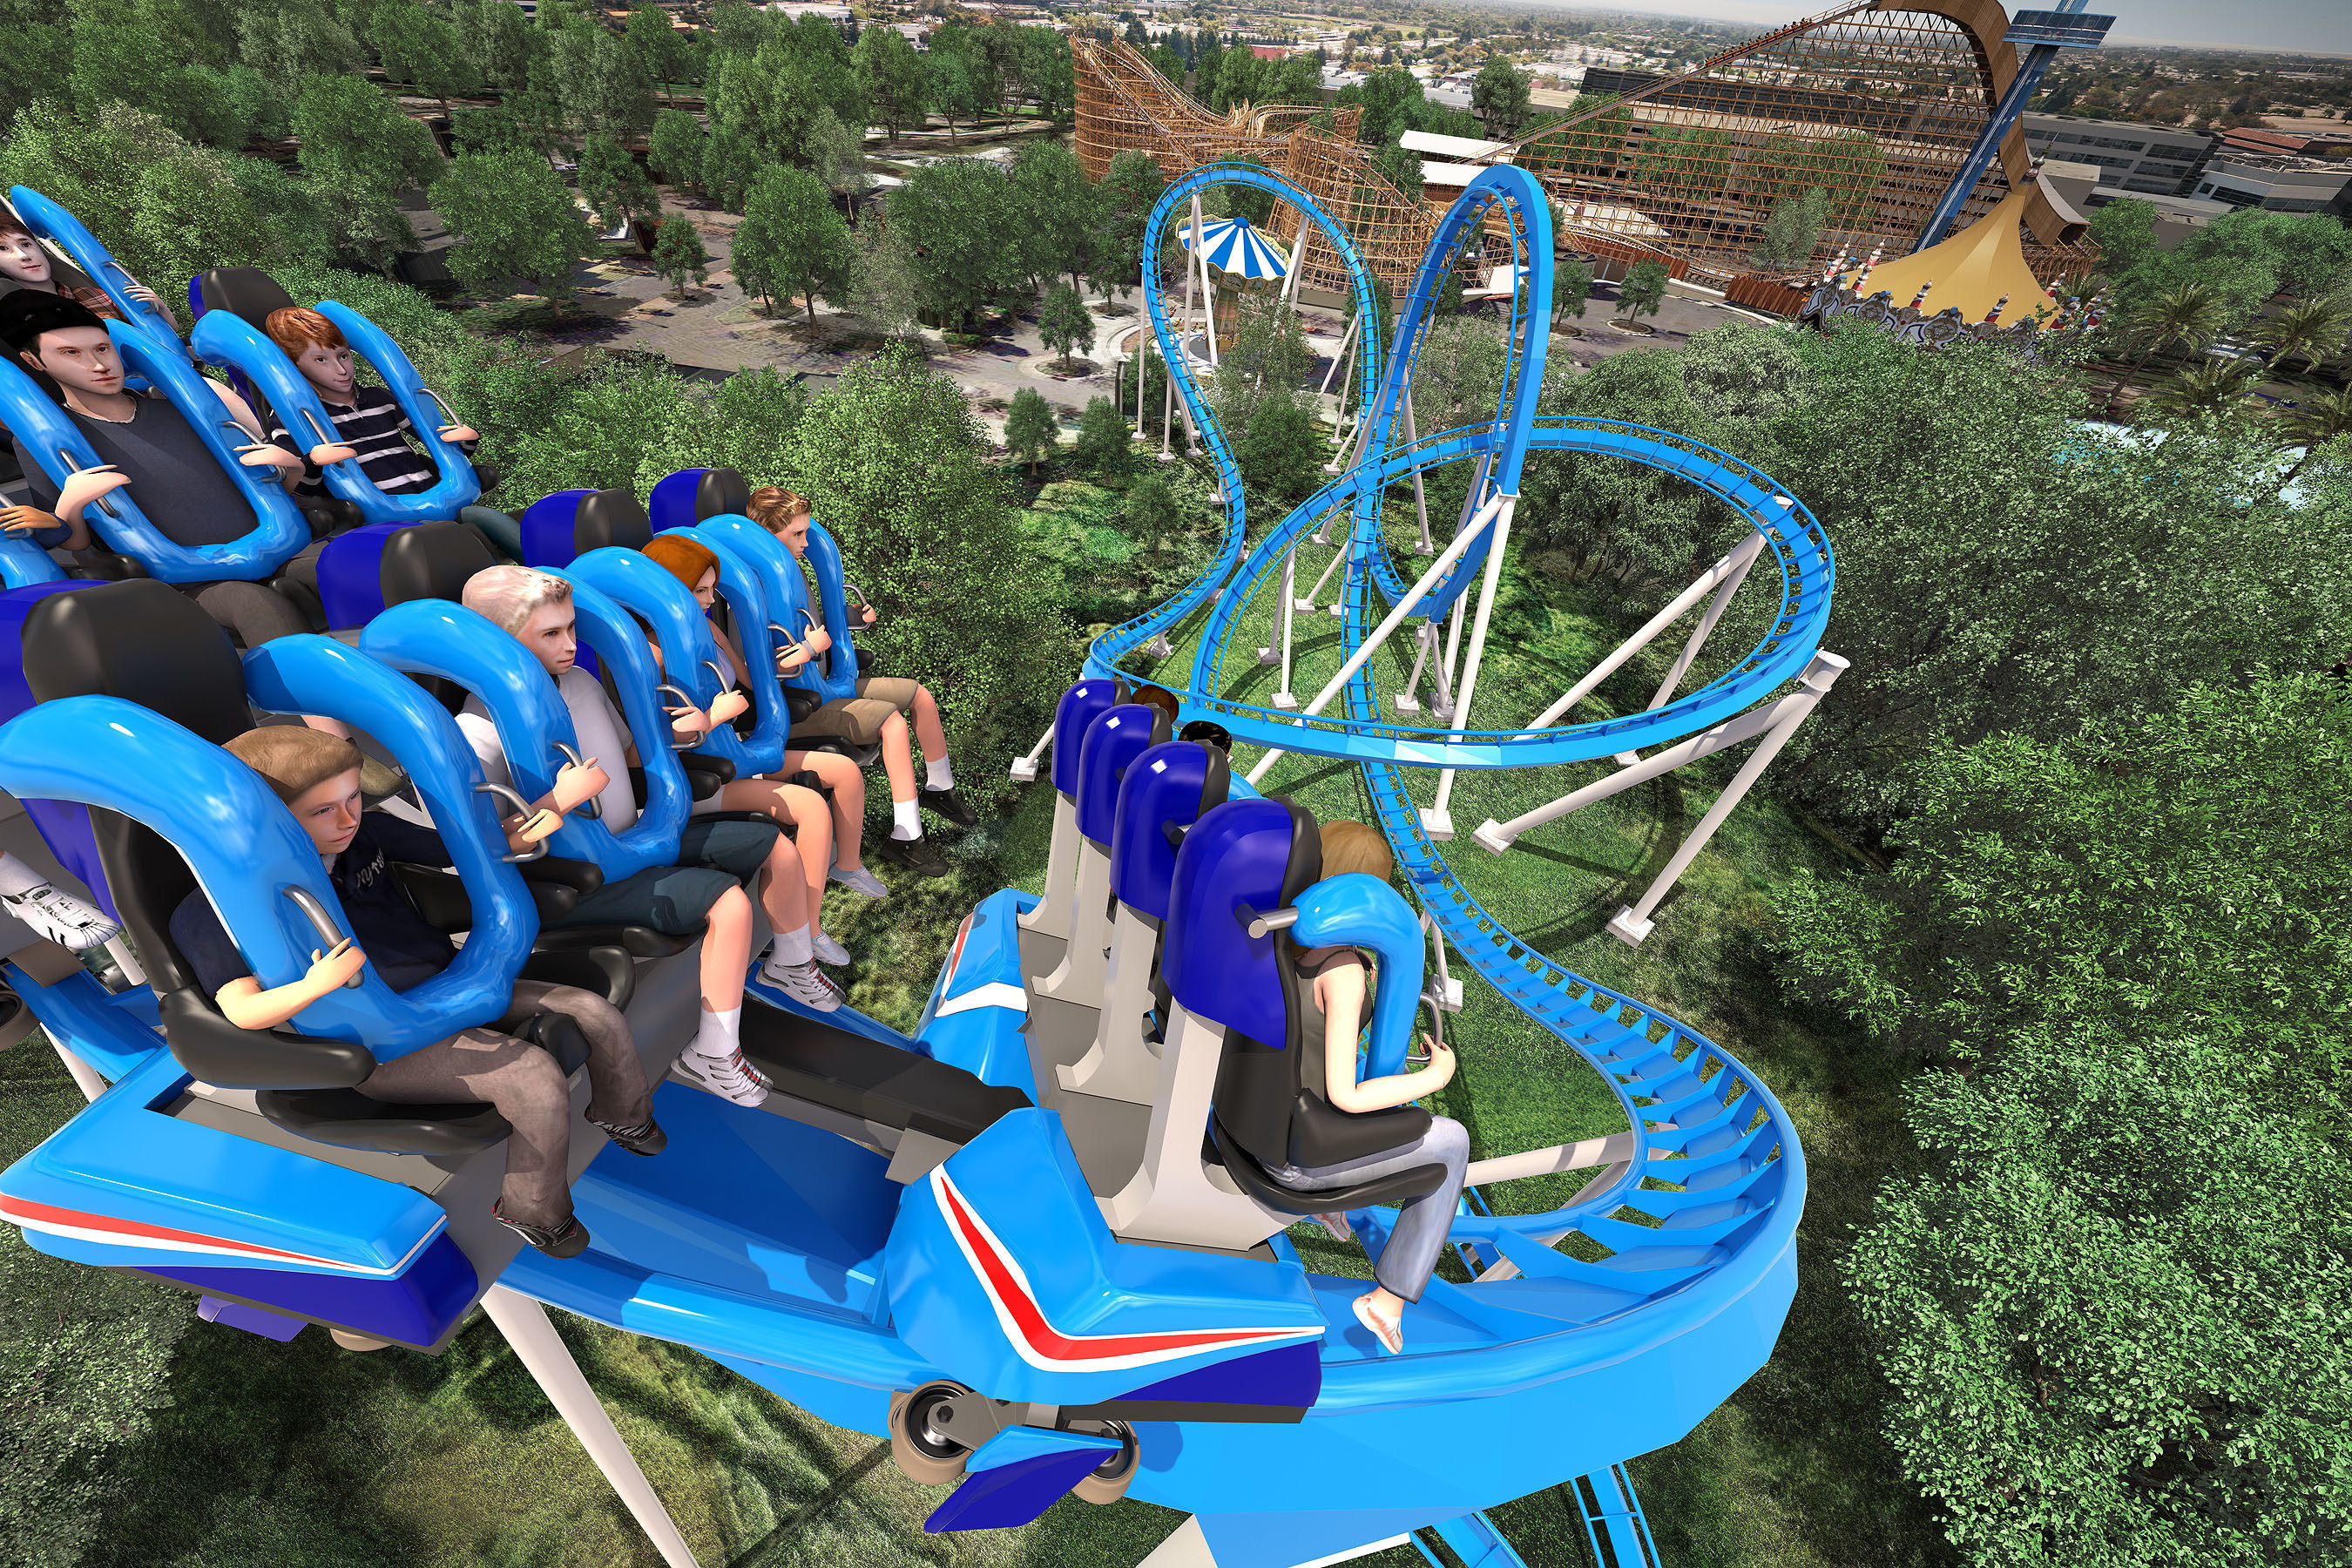 A rendering of the floorless Patriot roller coaster coming to California's Great America in 2017.